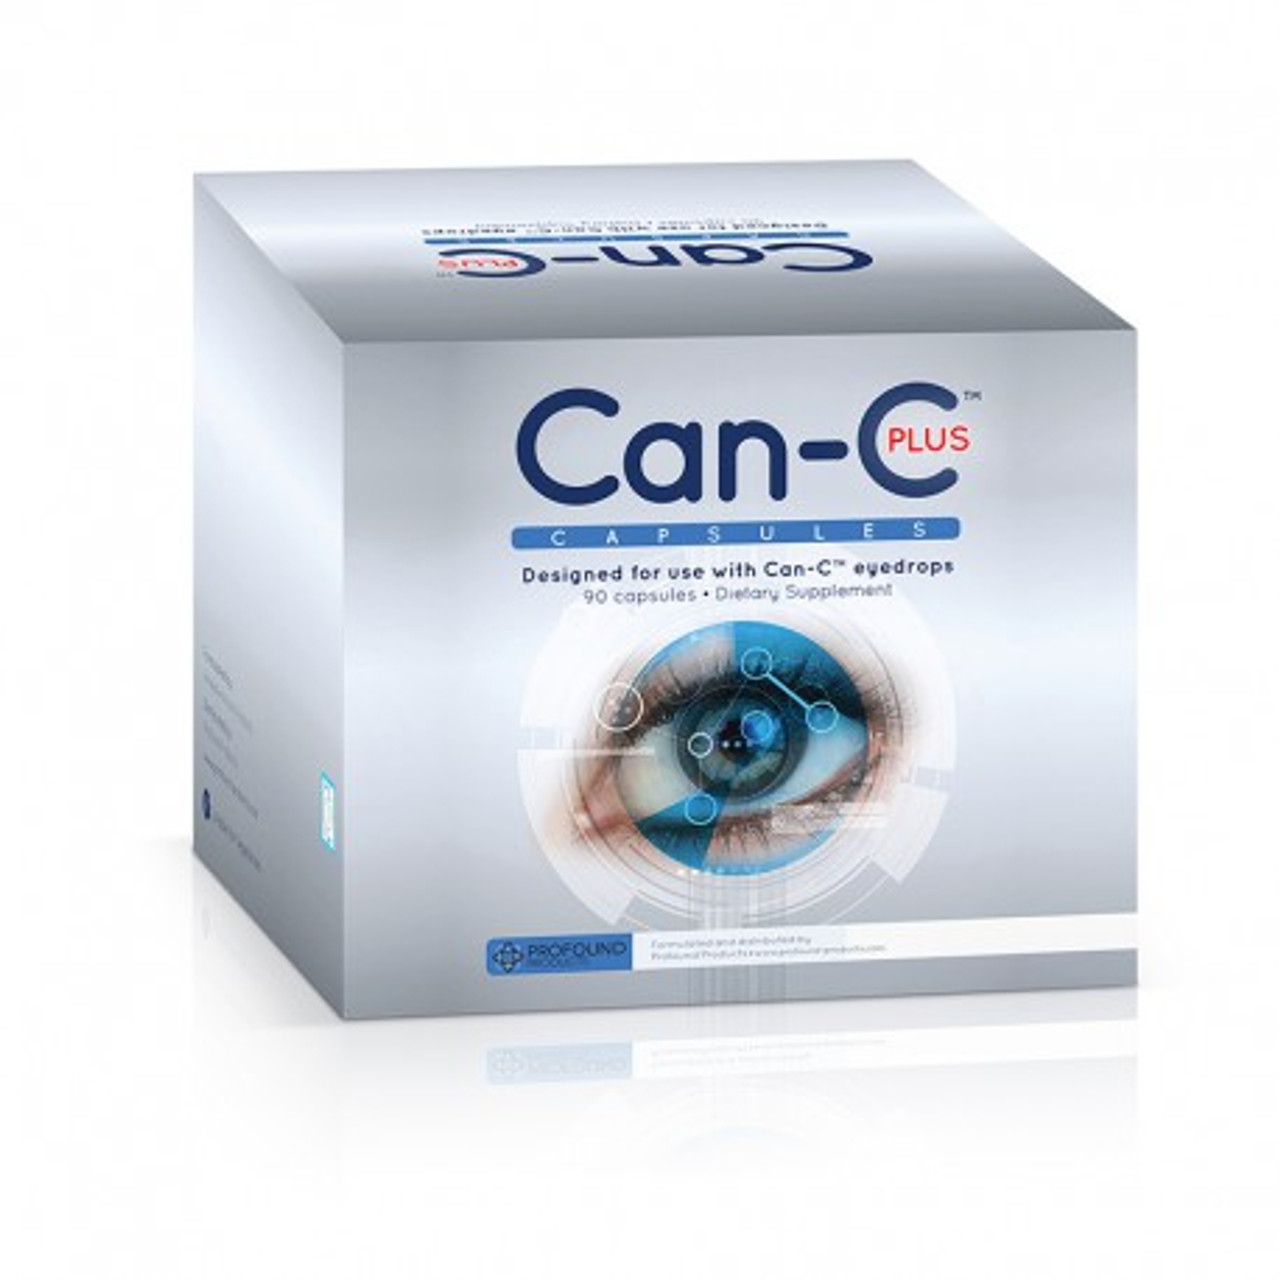 canc eye drops for dogs